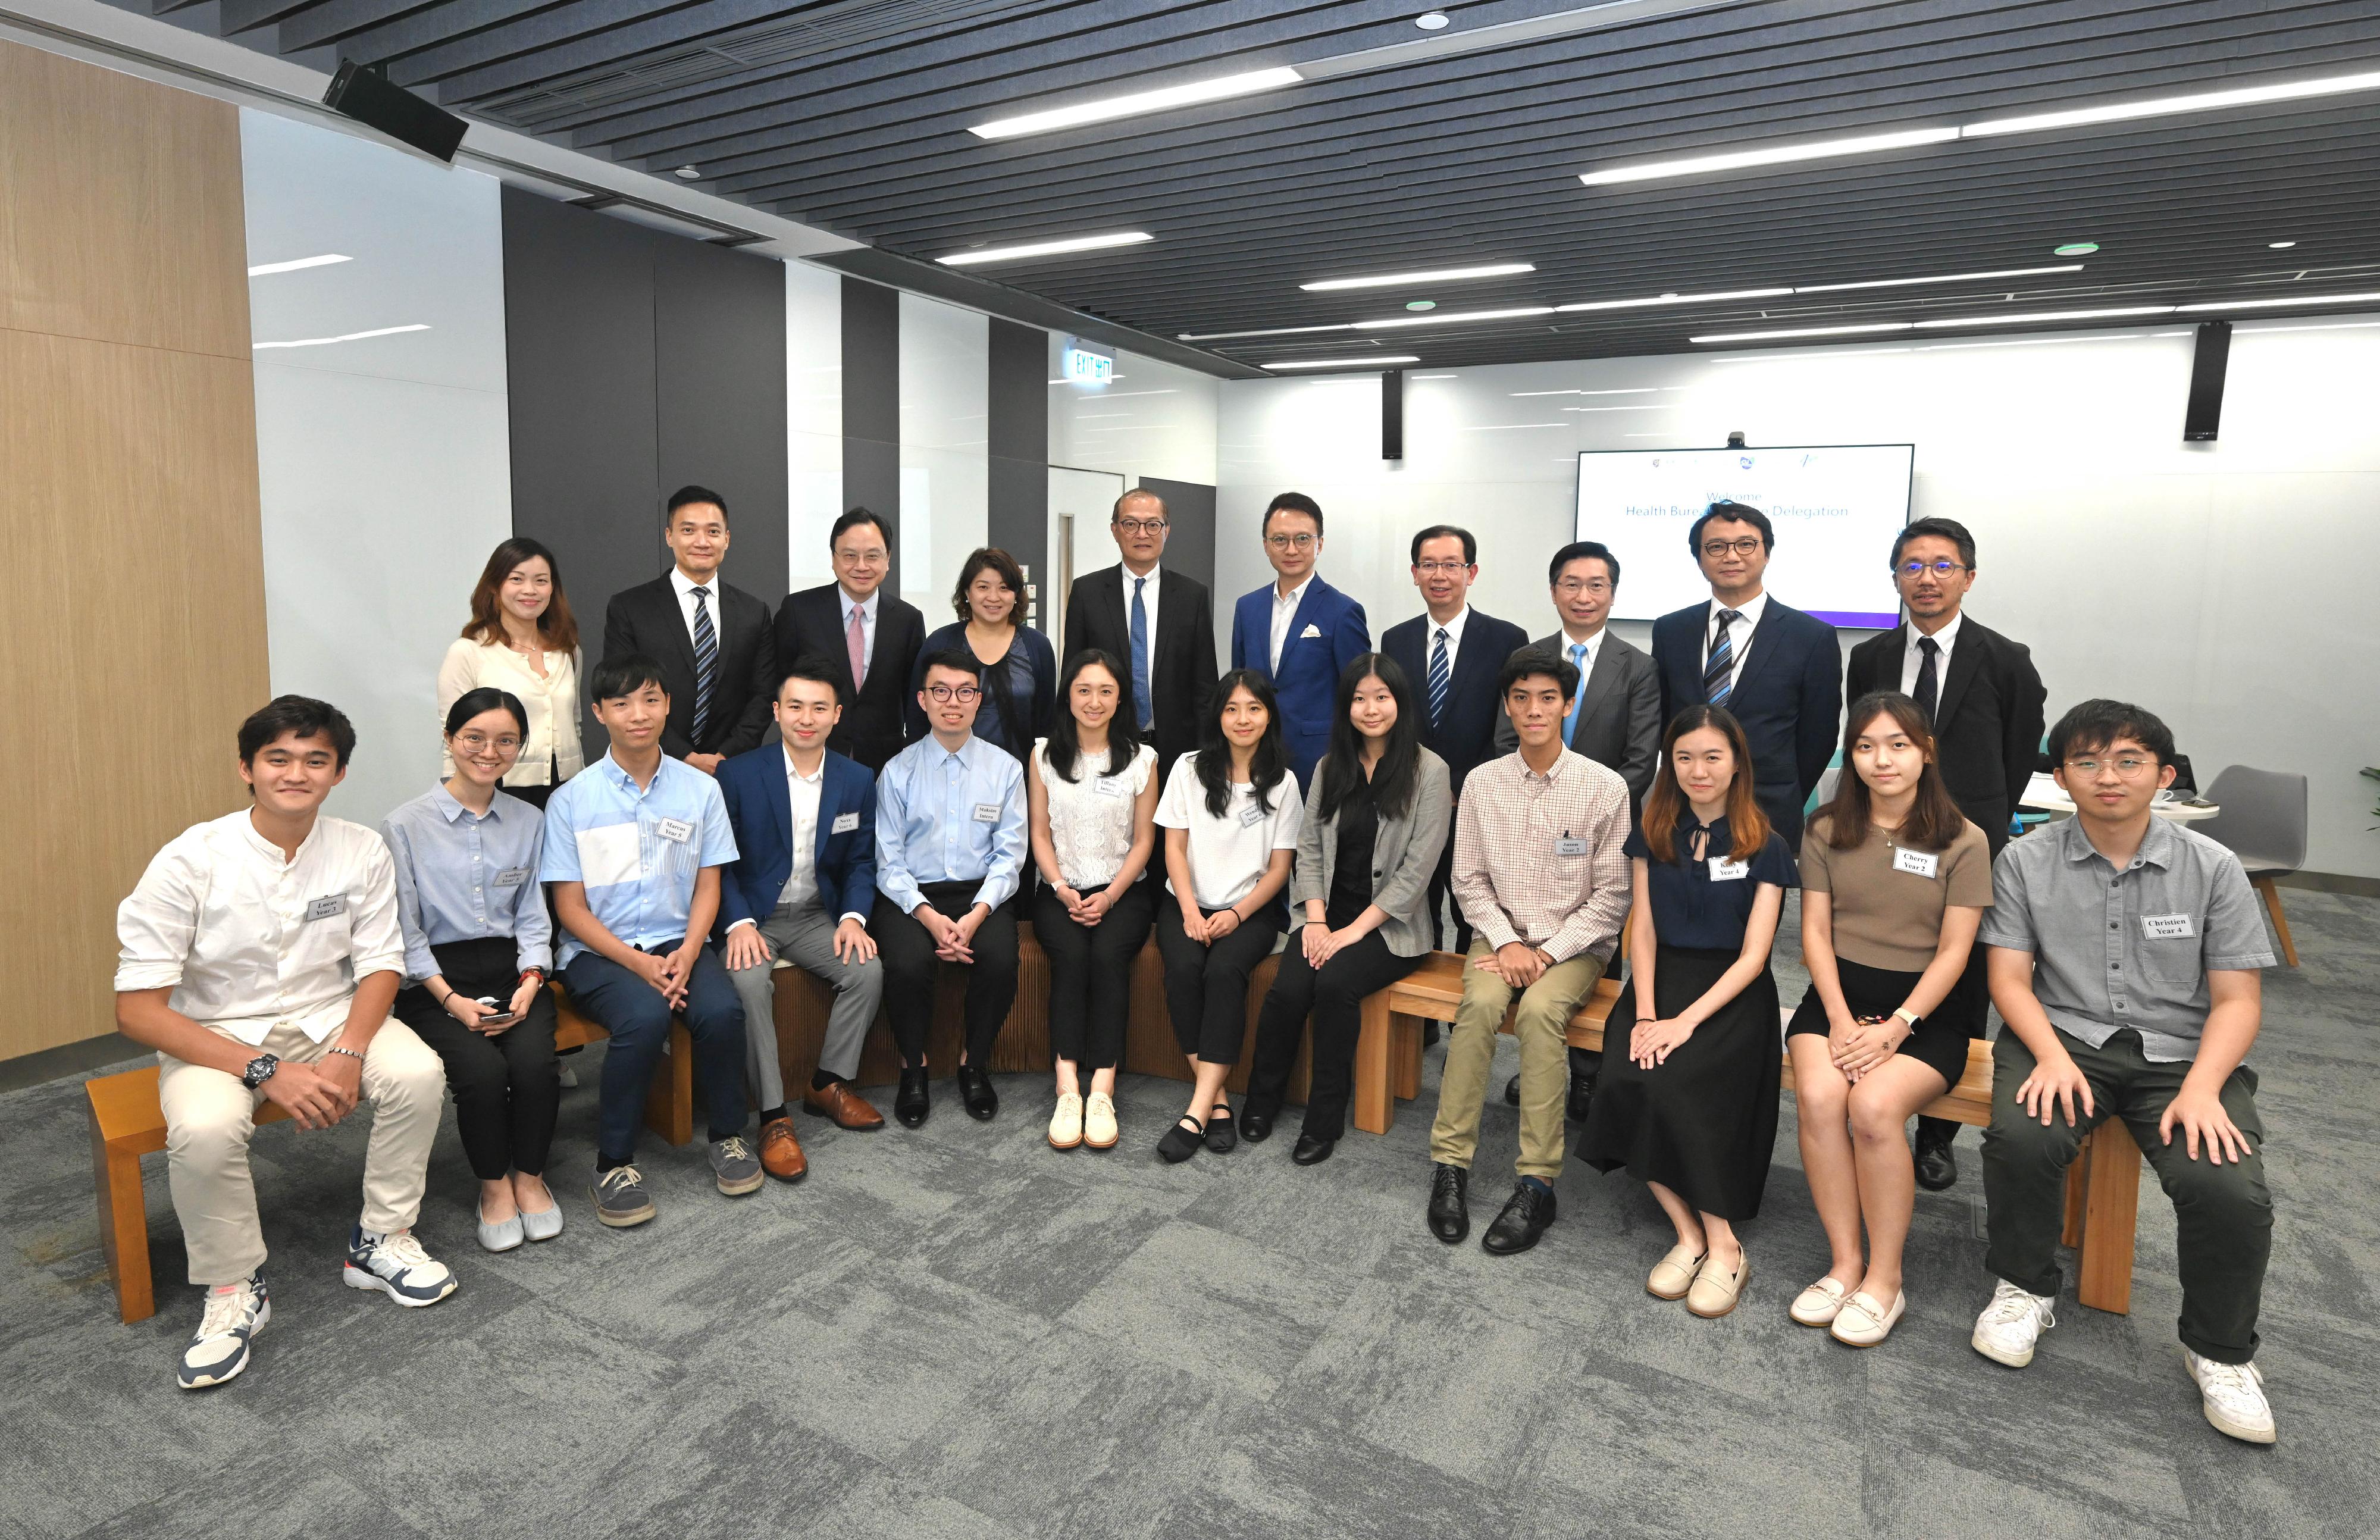 The Secretary for Health, Professor Lo Chung-mau, visited the Faculty of Medicine of the Chinese University of Hong Kong (CU Medicine) today (September 21). Photo shows Professor Lo (back row, fifth left), the Under Secretary for Health, Dr Libby Lee (back row, fourth left), with the Dean of CU Medicine, Professor Francis Chan (back row, fifth right), some medical students and other representatives of the Faculty.